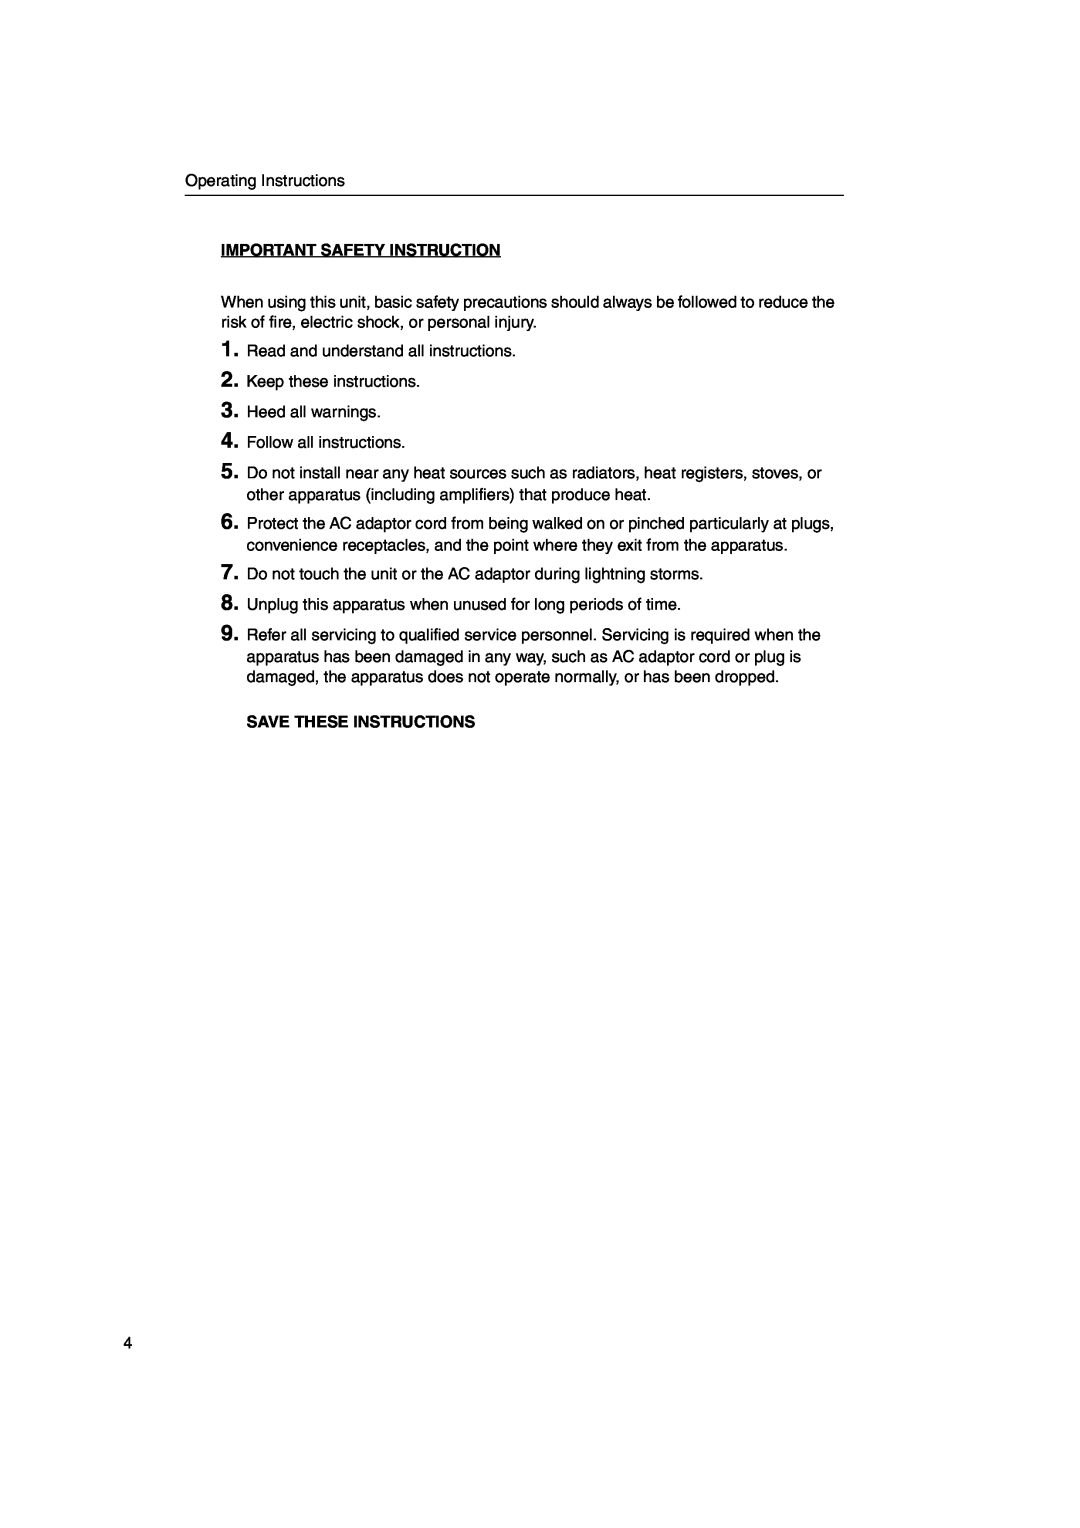 Panasonic KX-HGW600 manual Important Safety Instruction, Save These Instructions 